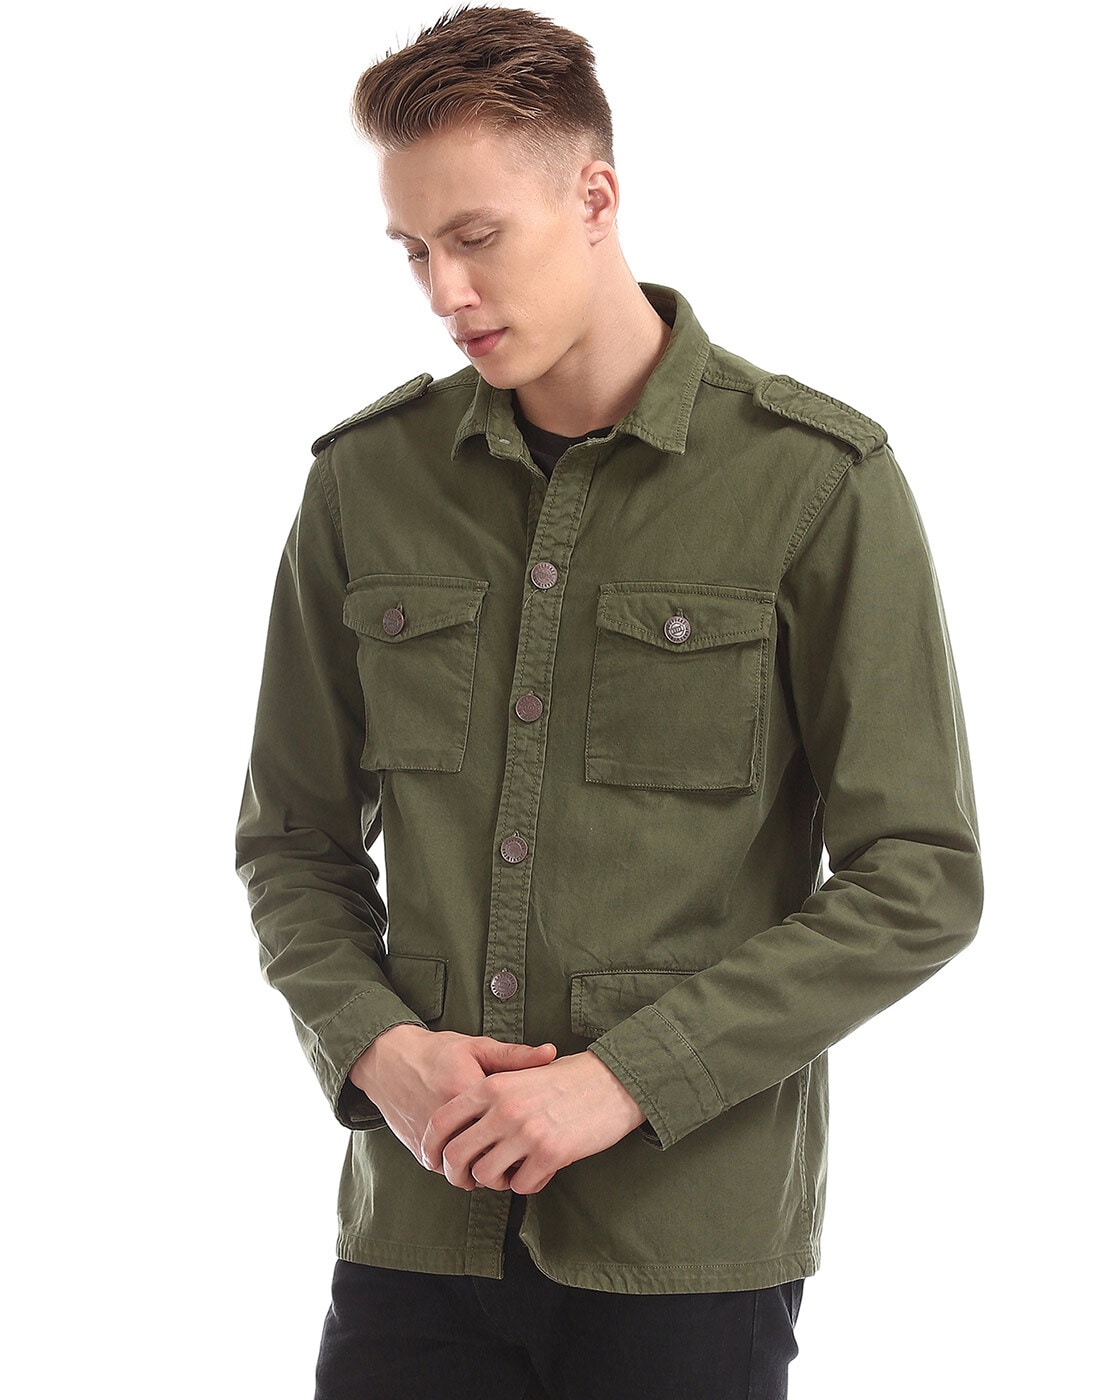 Cute Green Military Inspired Jacket – Boldmode, 47% OFF